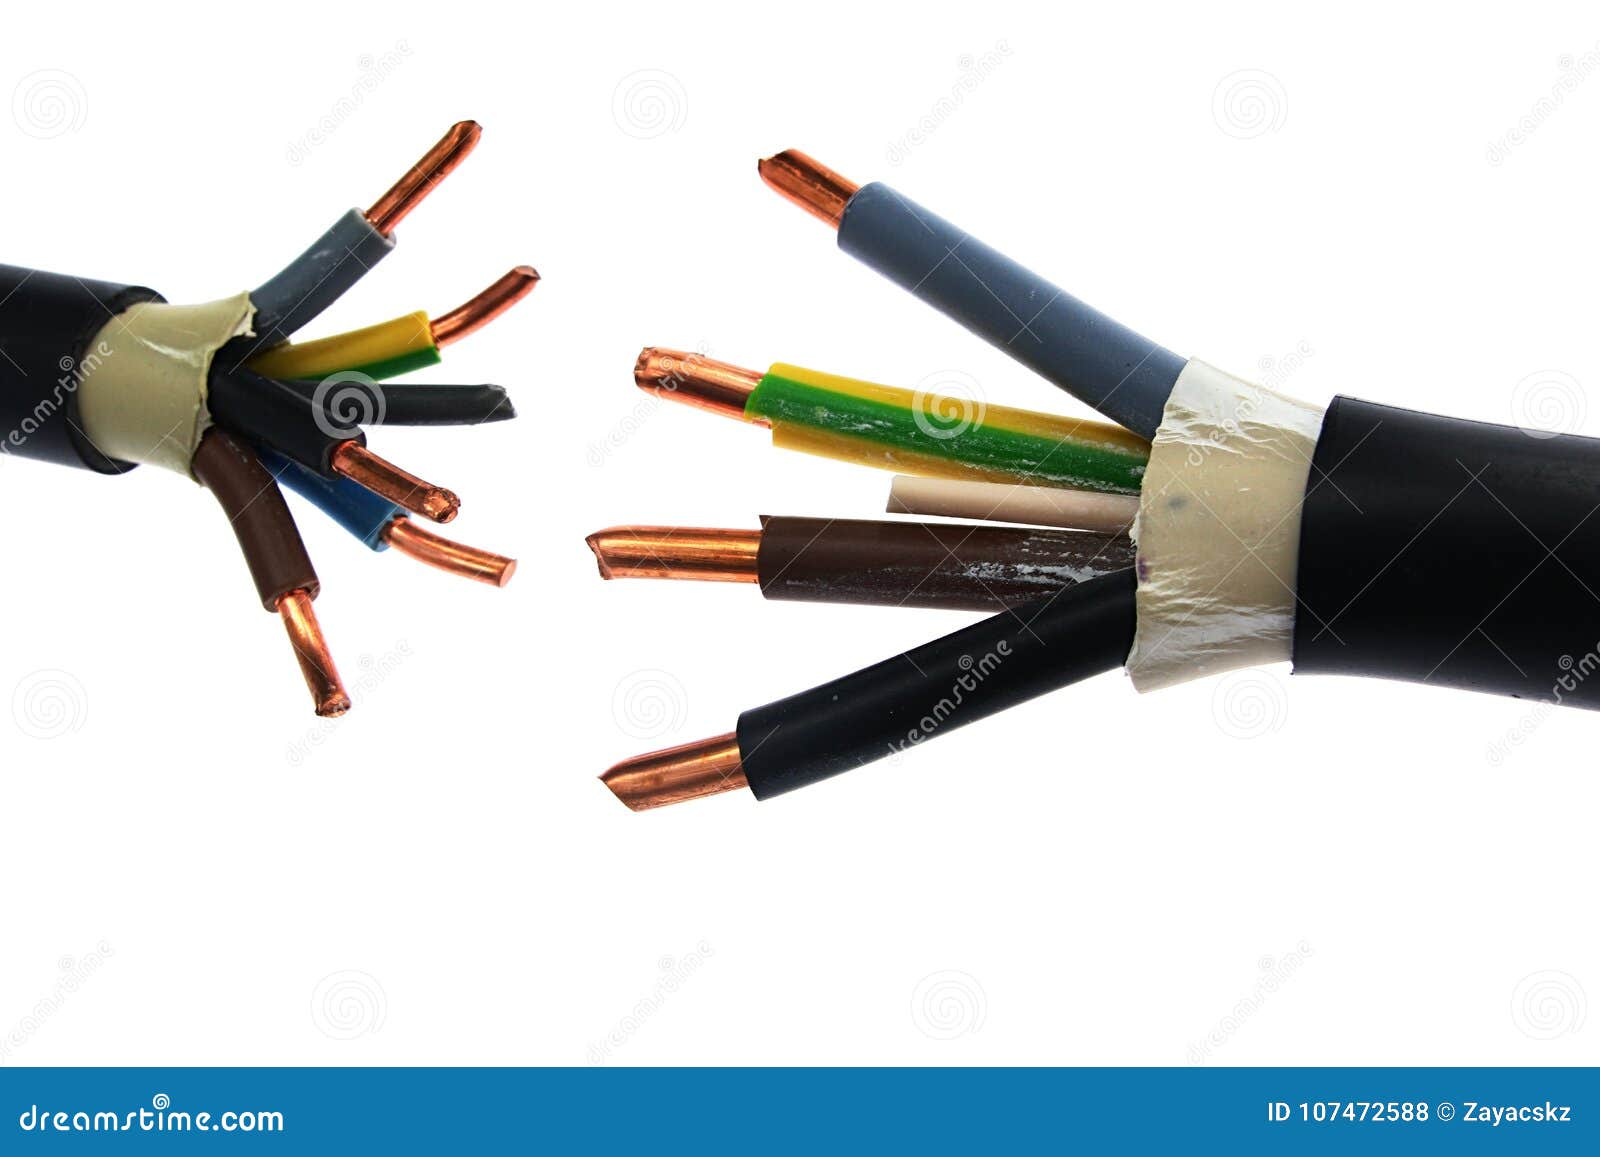 copper electric power cable assemblies in pvc insulation jackets standing against each other, white background